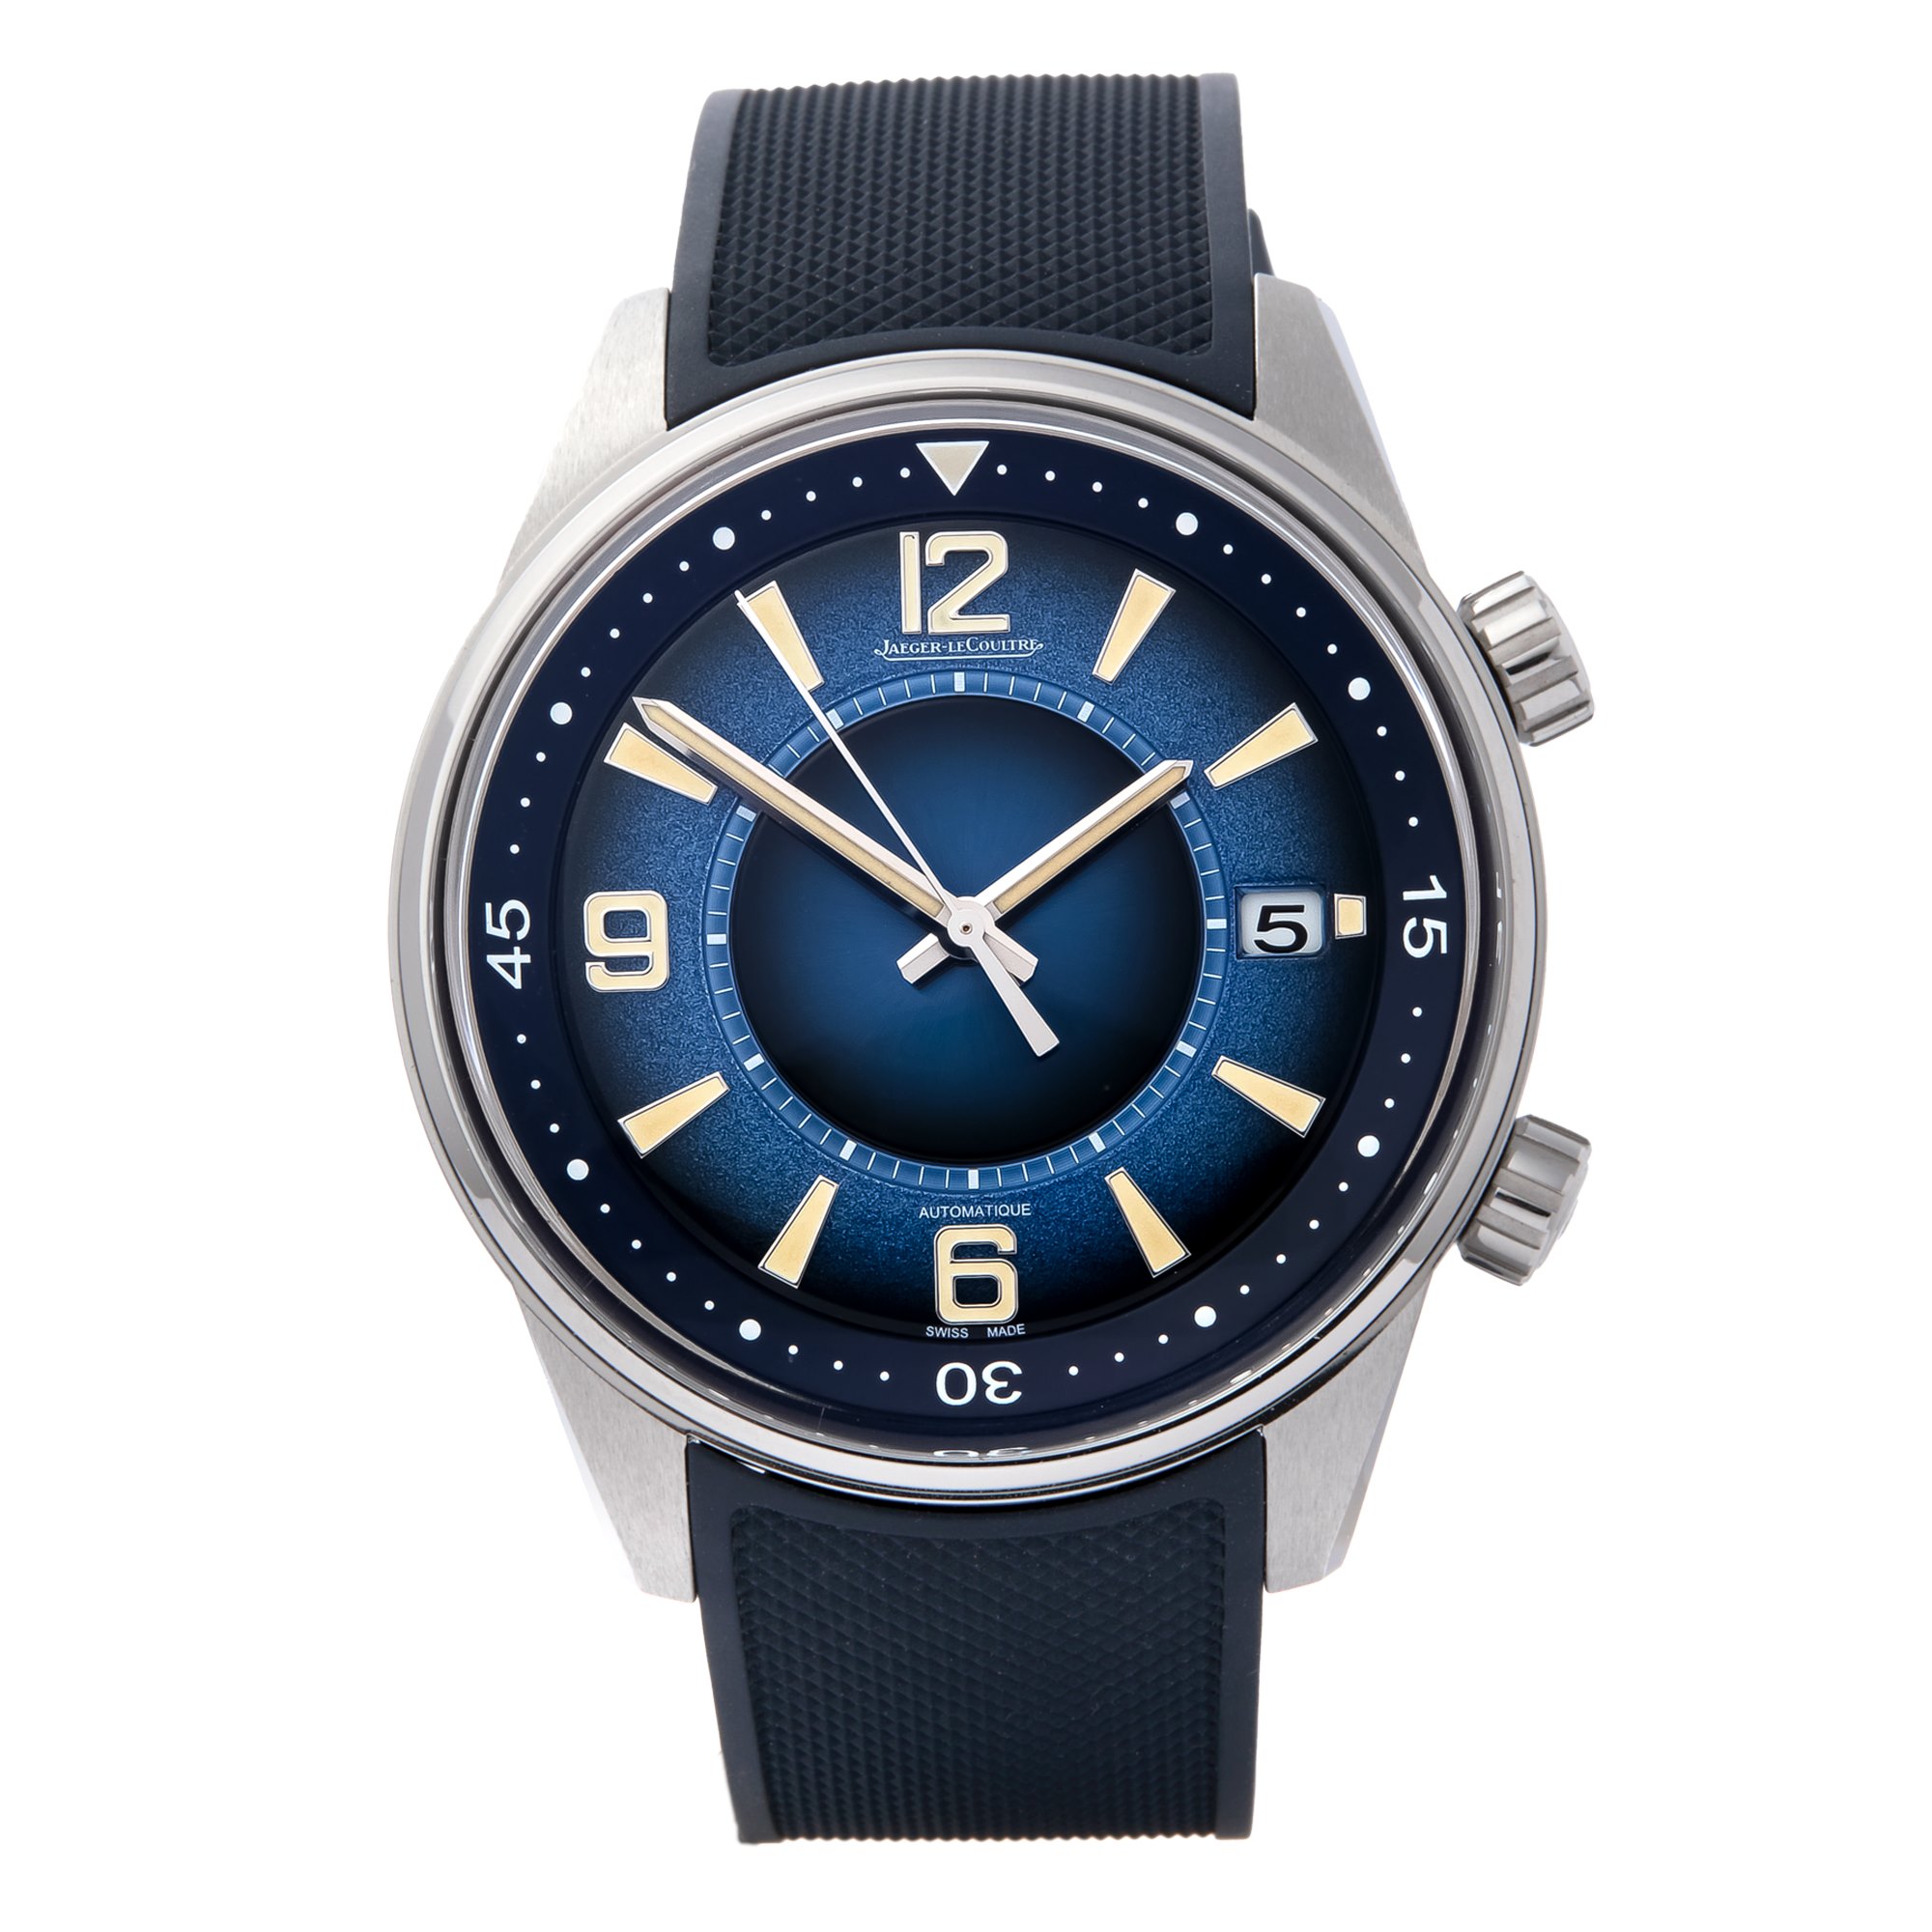 Jaeger-LeCoultre Polaris Date Limited Edition Stainless Steel Q9068681